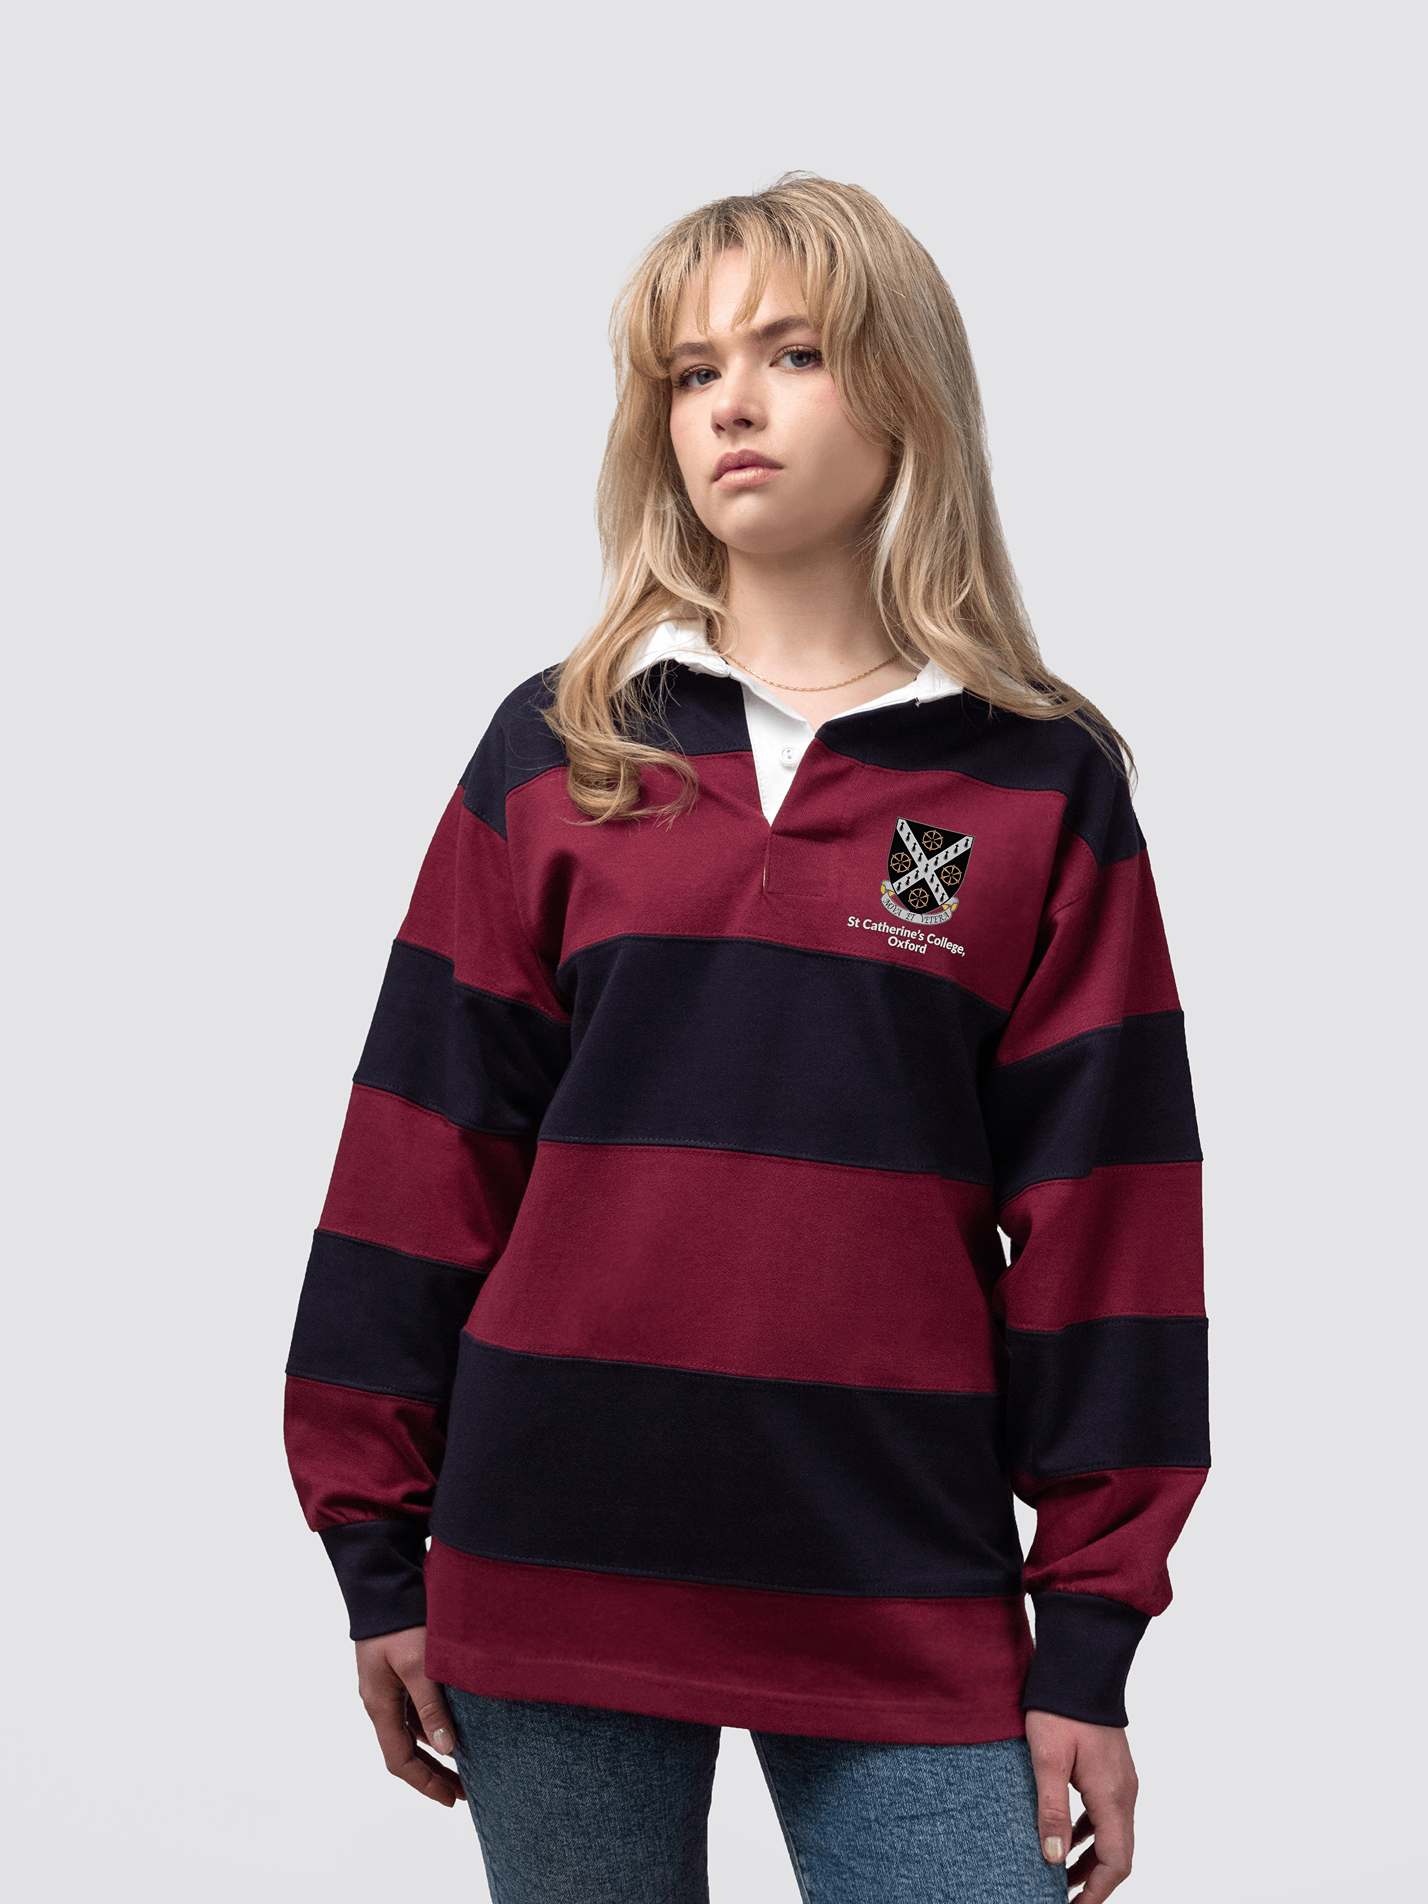 St Catherine's College rugby shirt, with burgundy and navy stripes